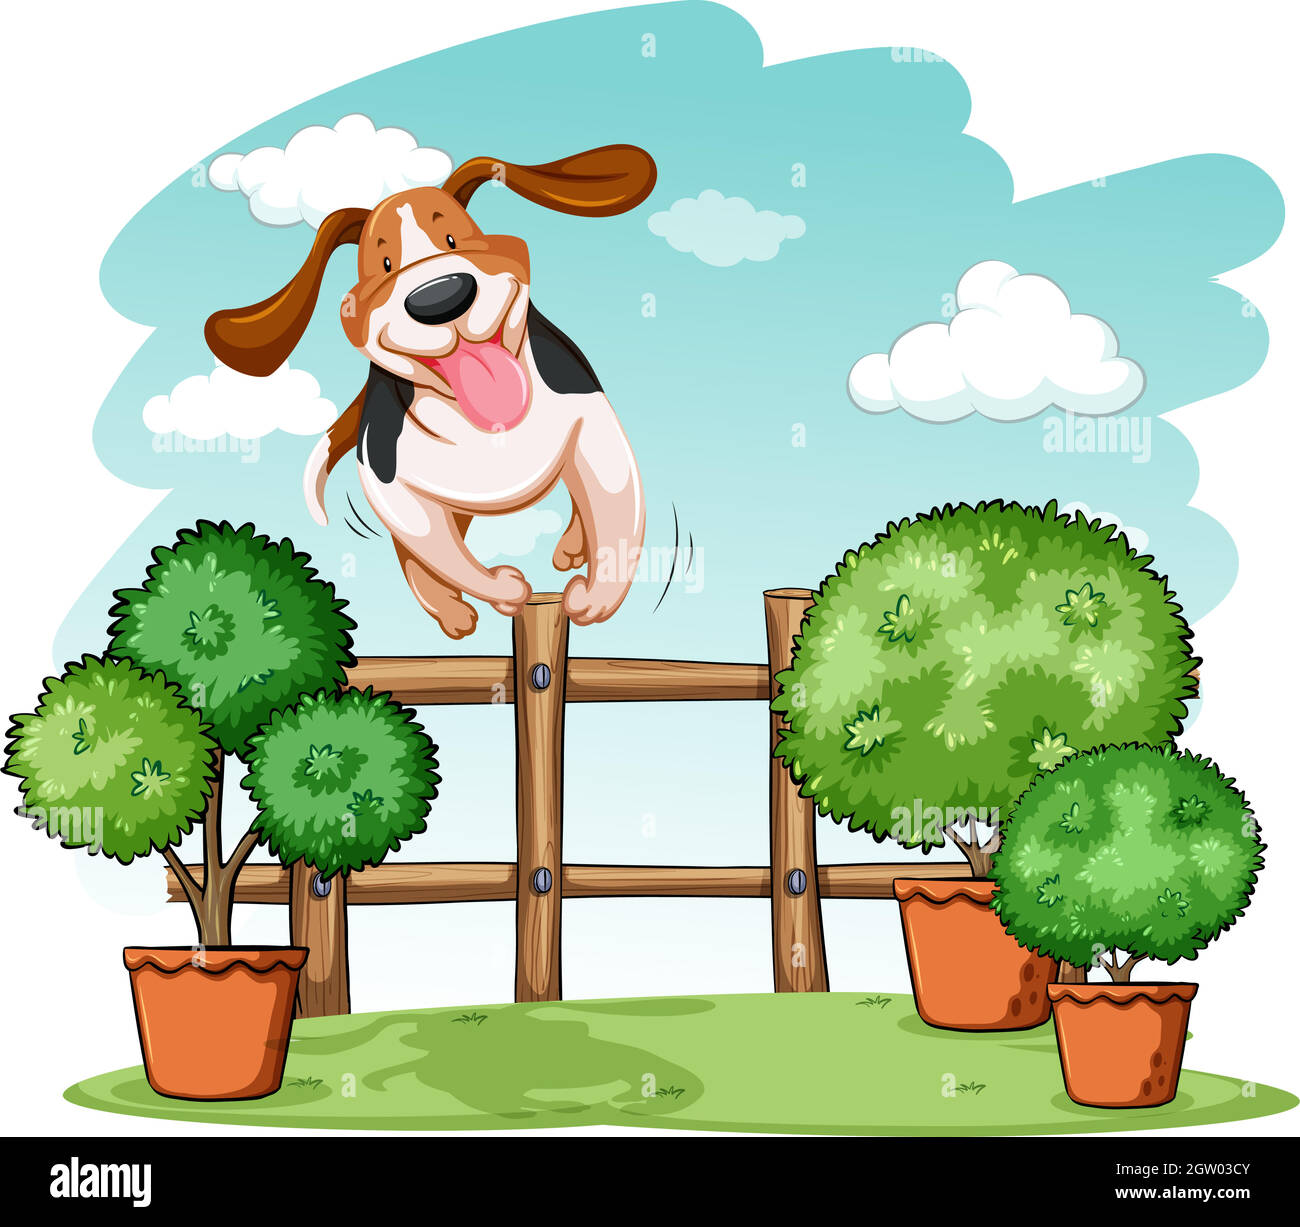 Dog jumping over the fence Stock Vector